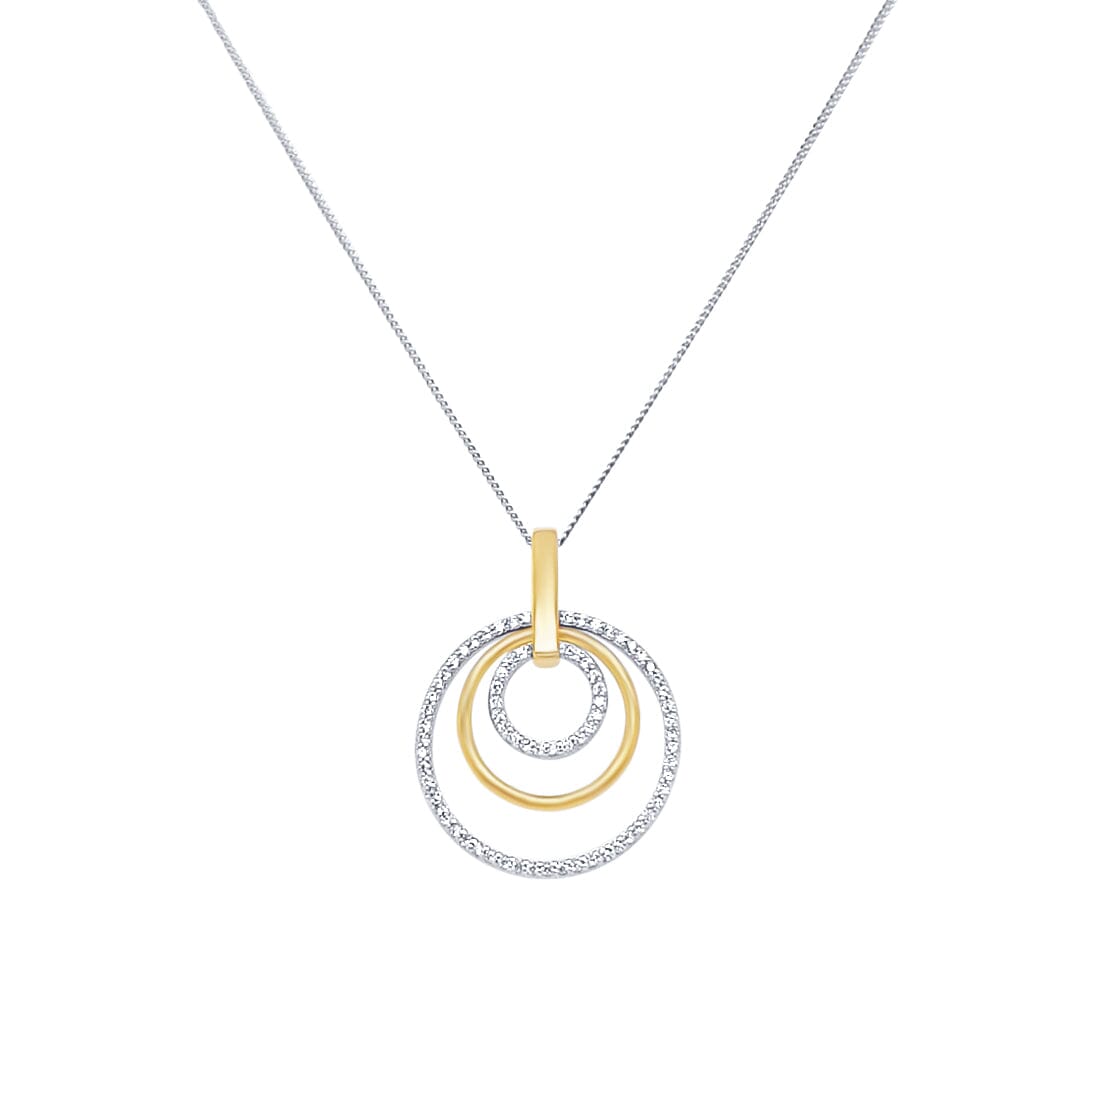 45cm Open Circle Necklace with Cubic Zirconia in Sterling Silver Necklaces Bevilles 